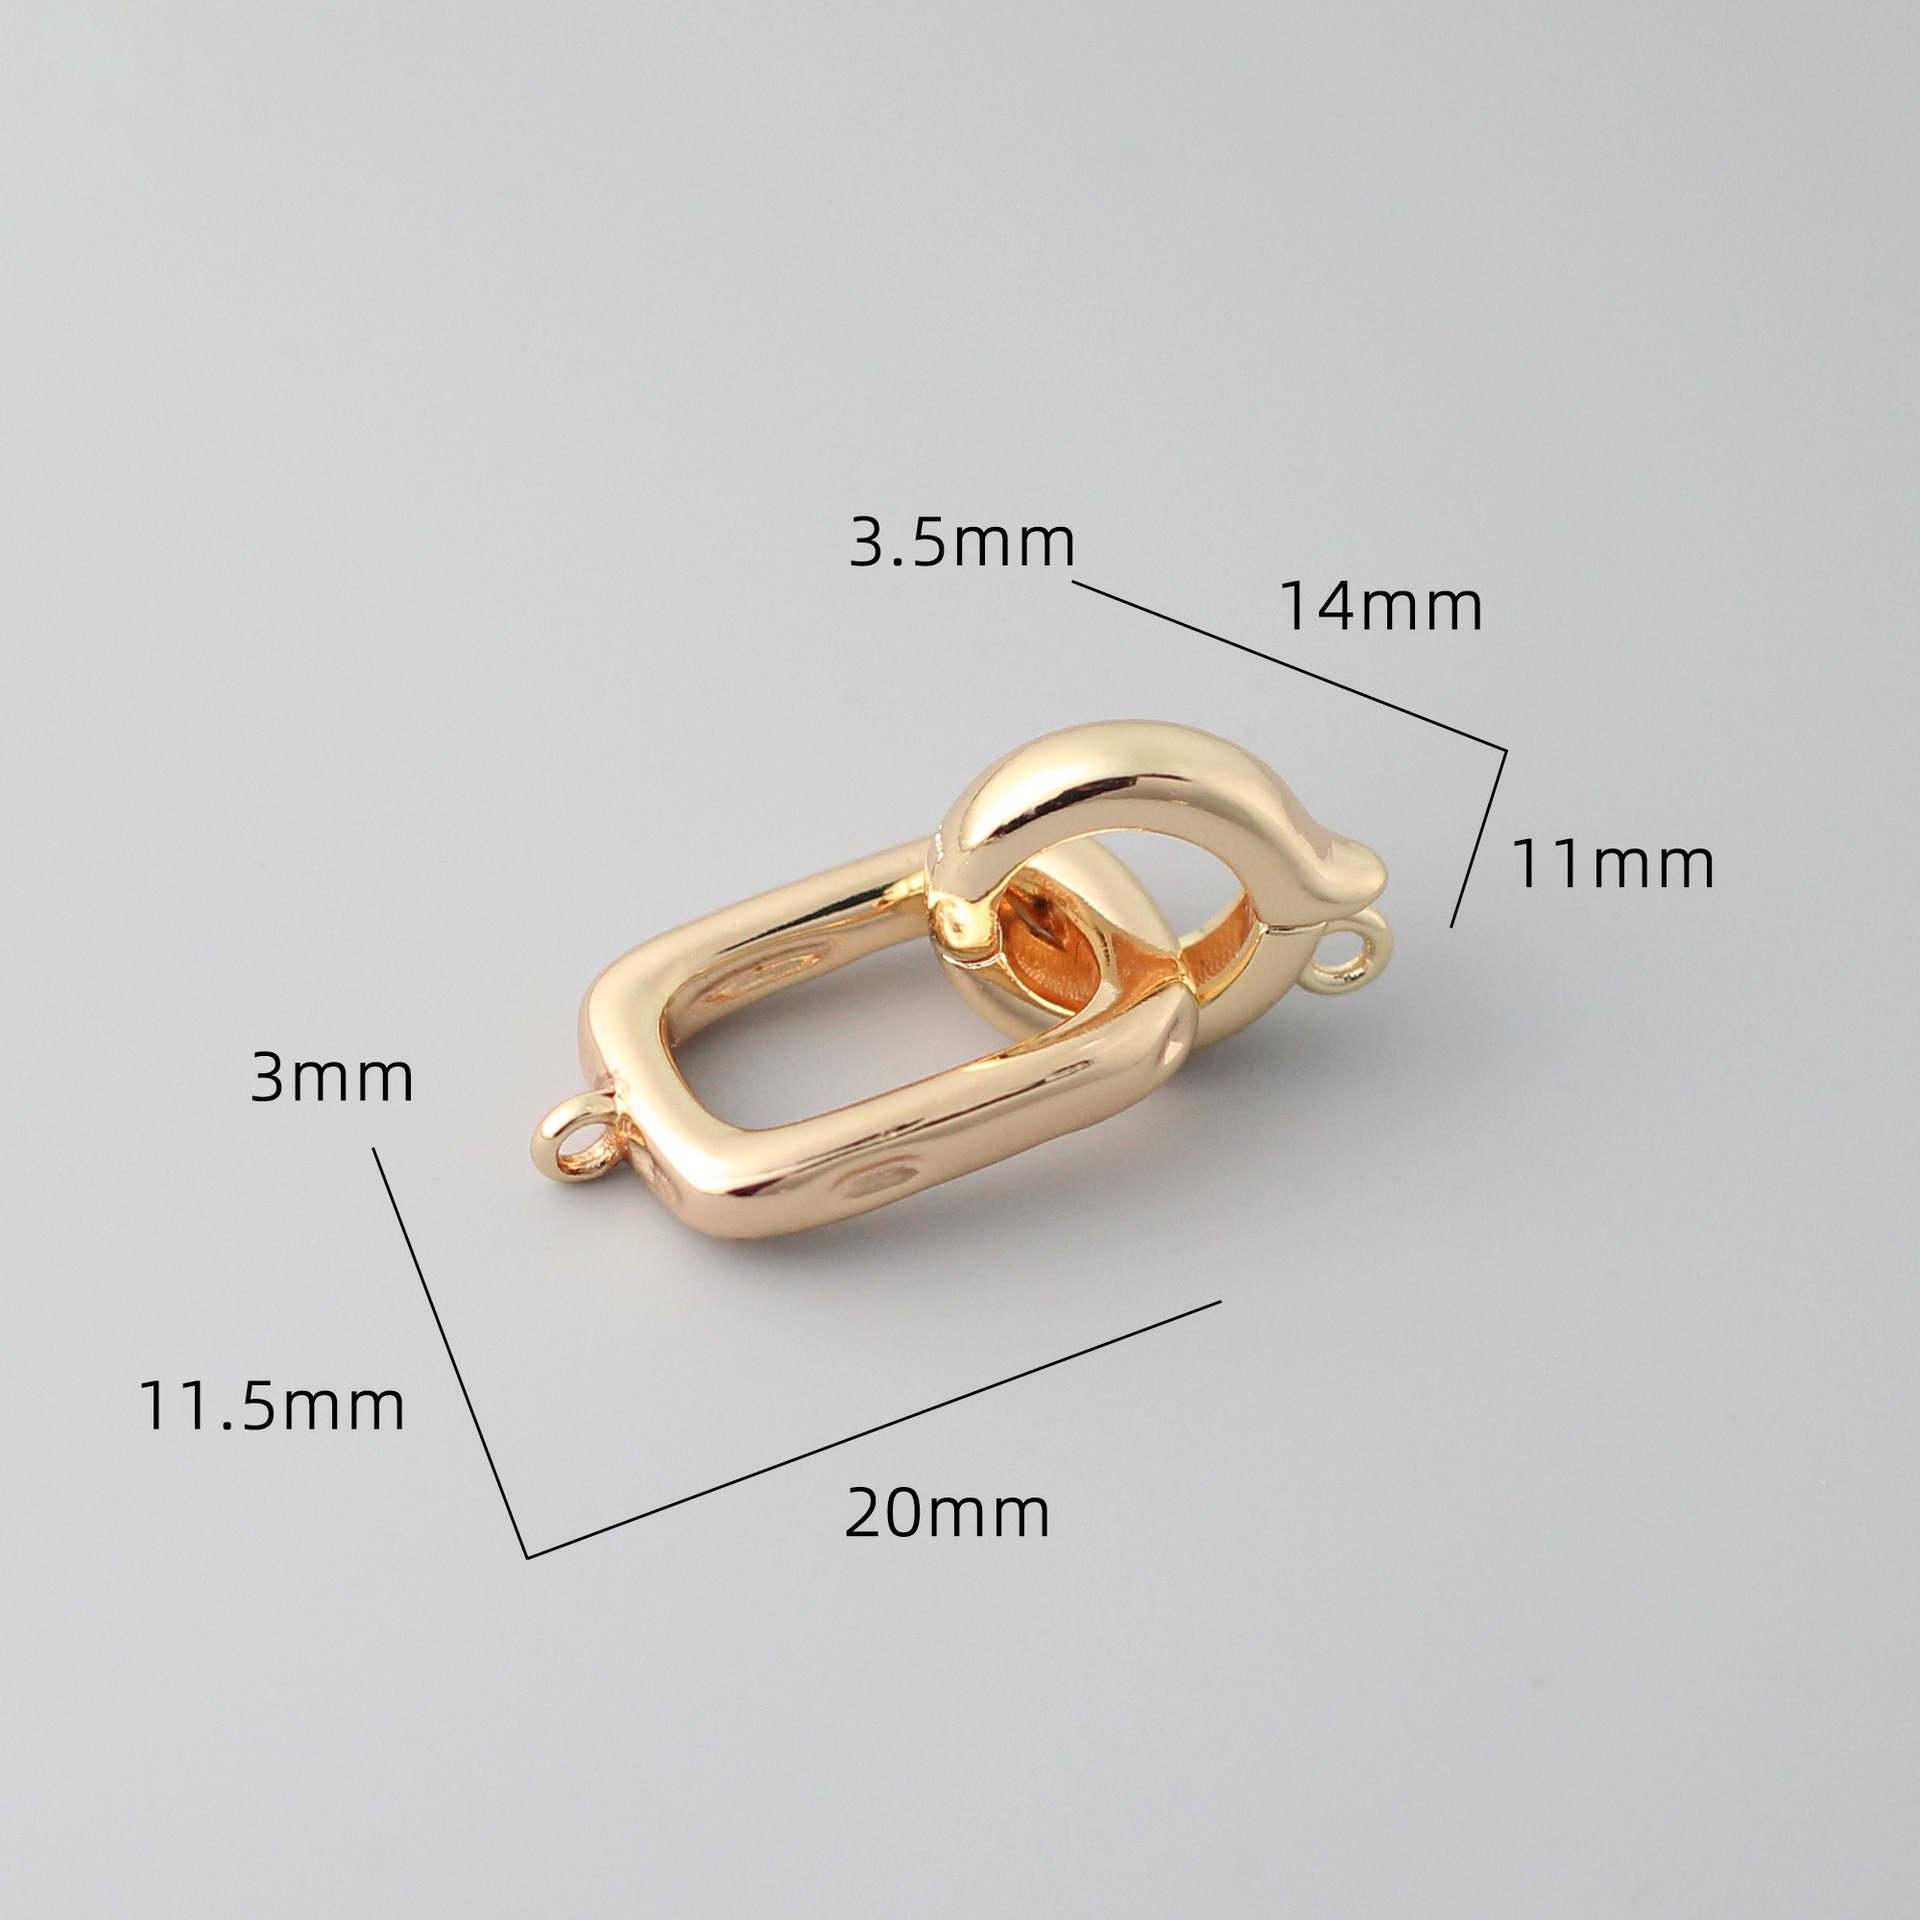 1:Plated 18k gold (square buckle)